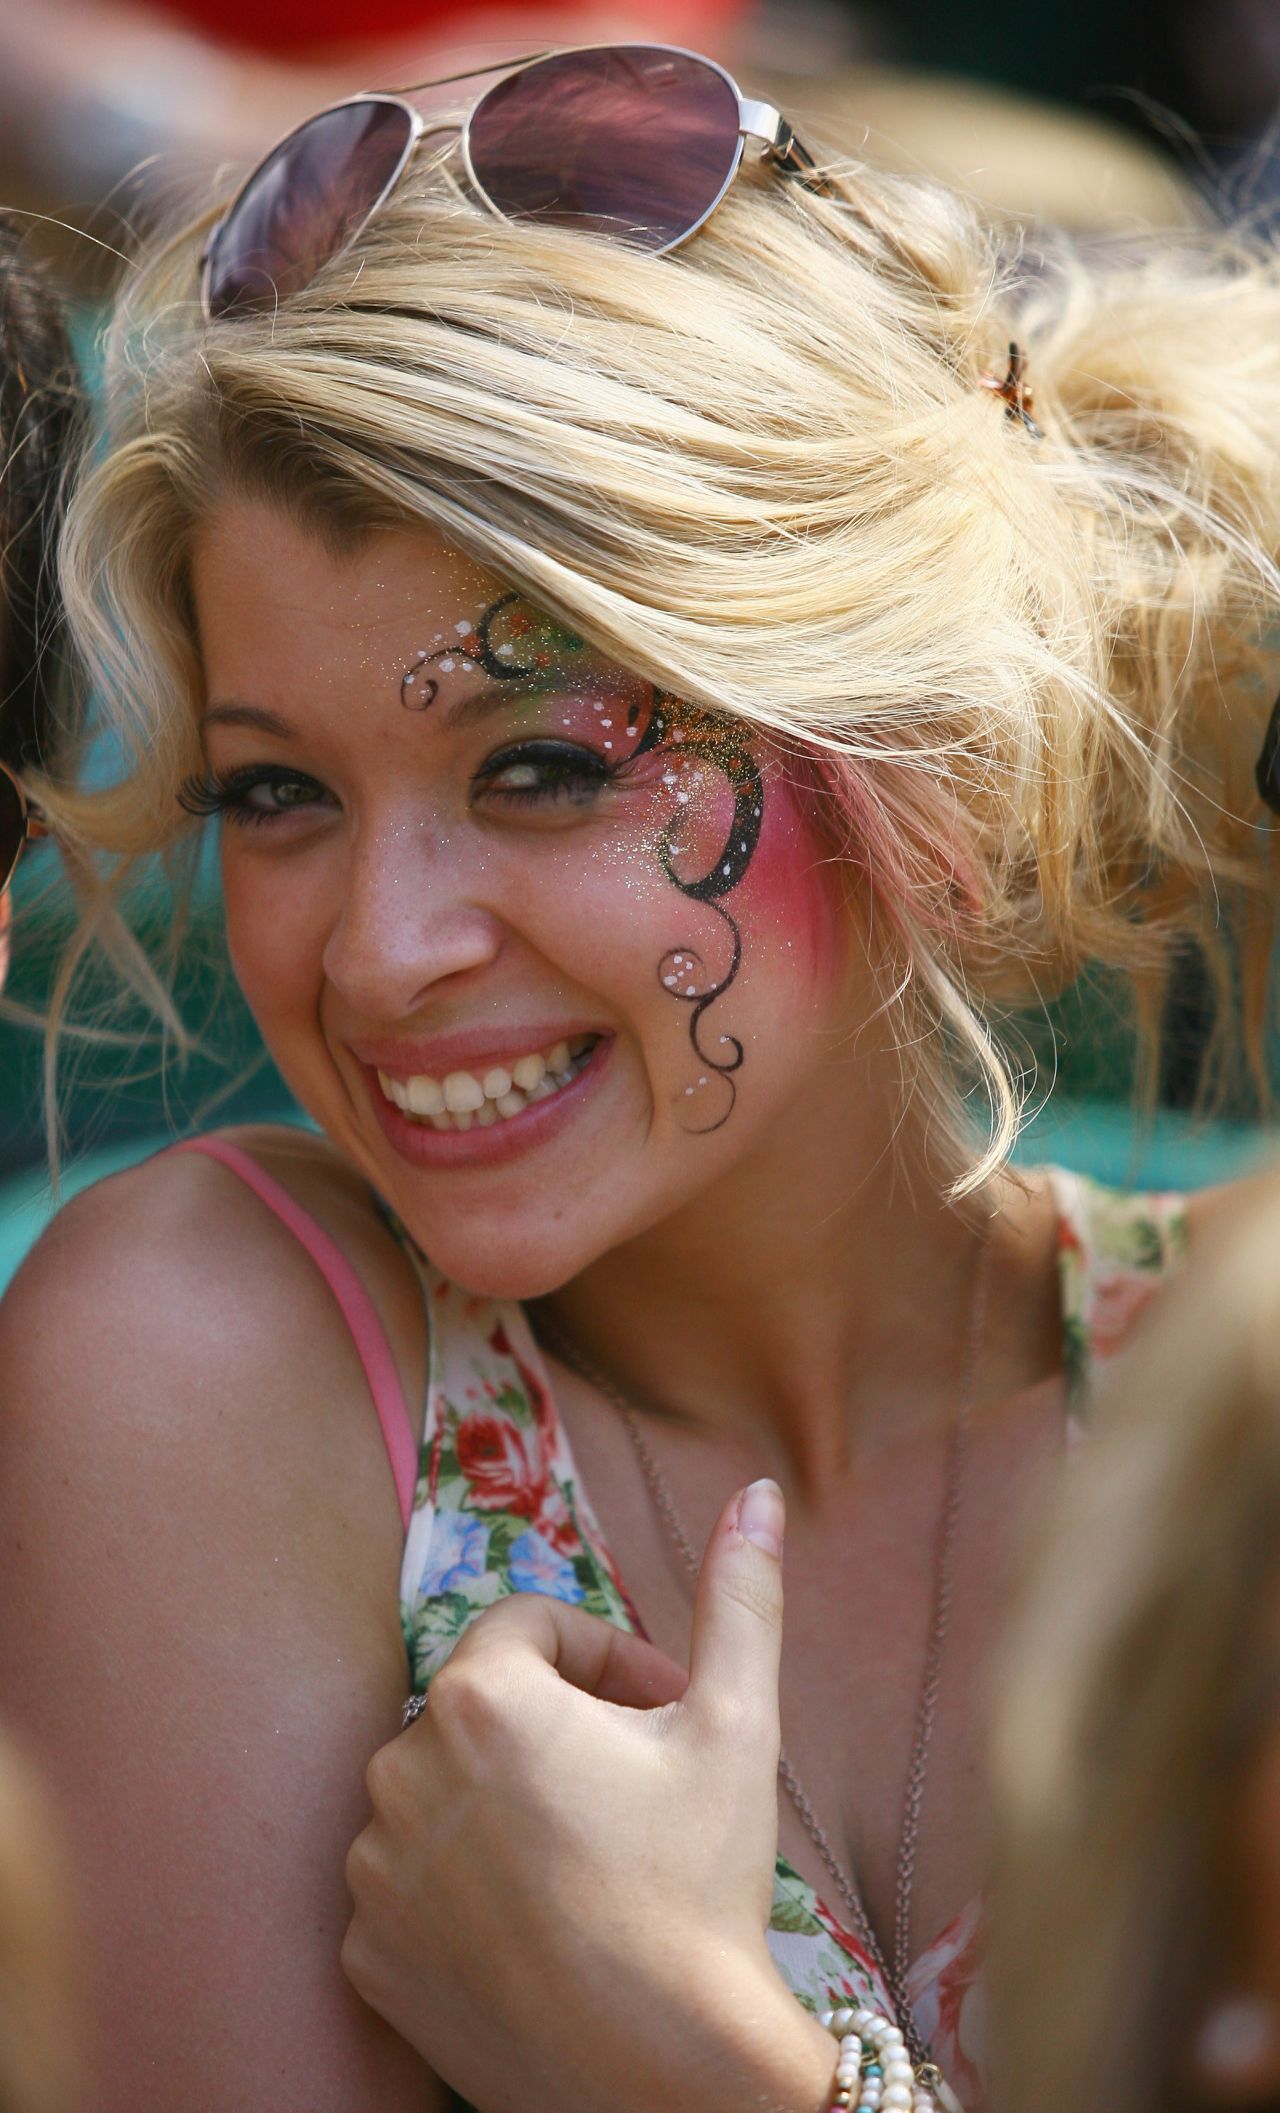 Face-painting is also a common motif for fans.